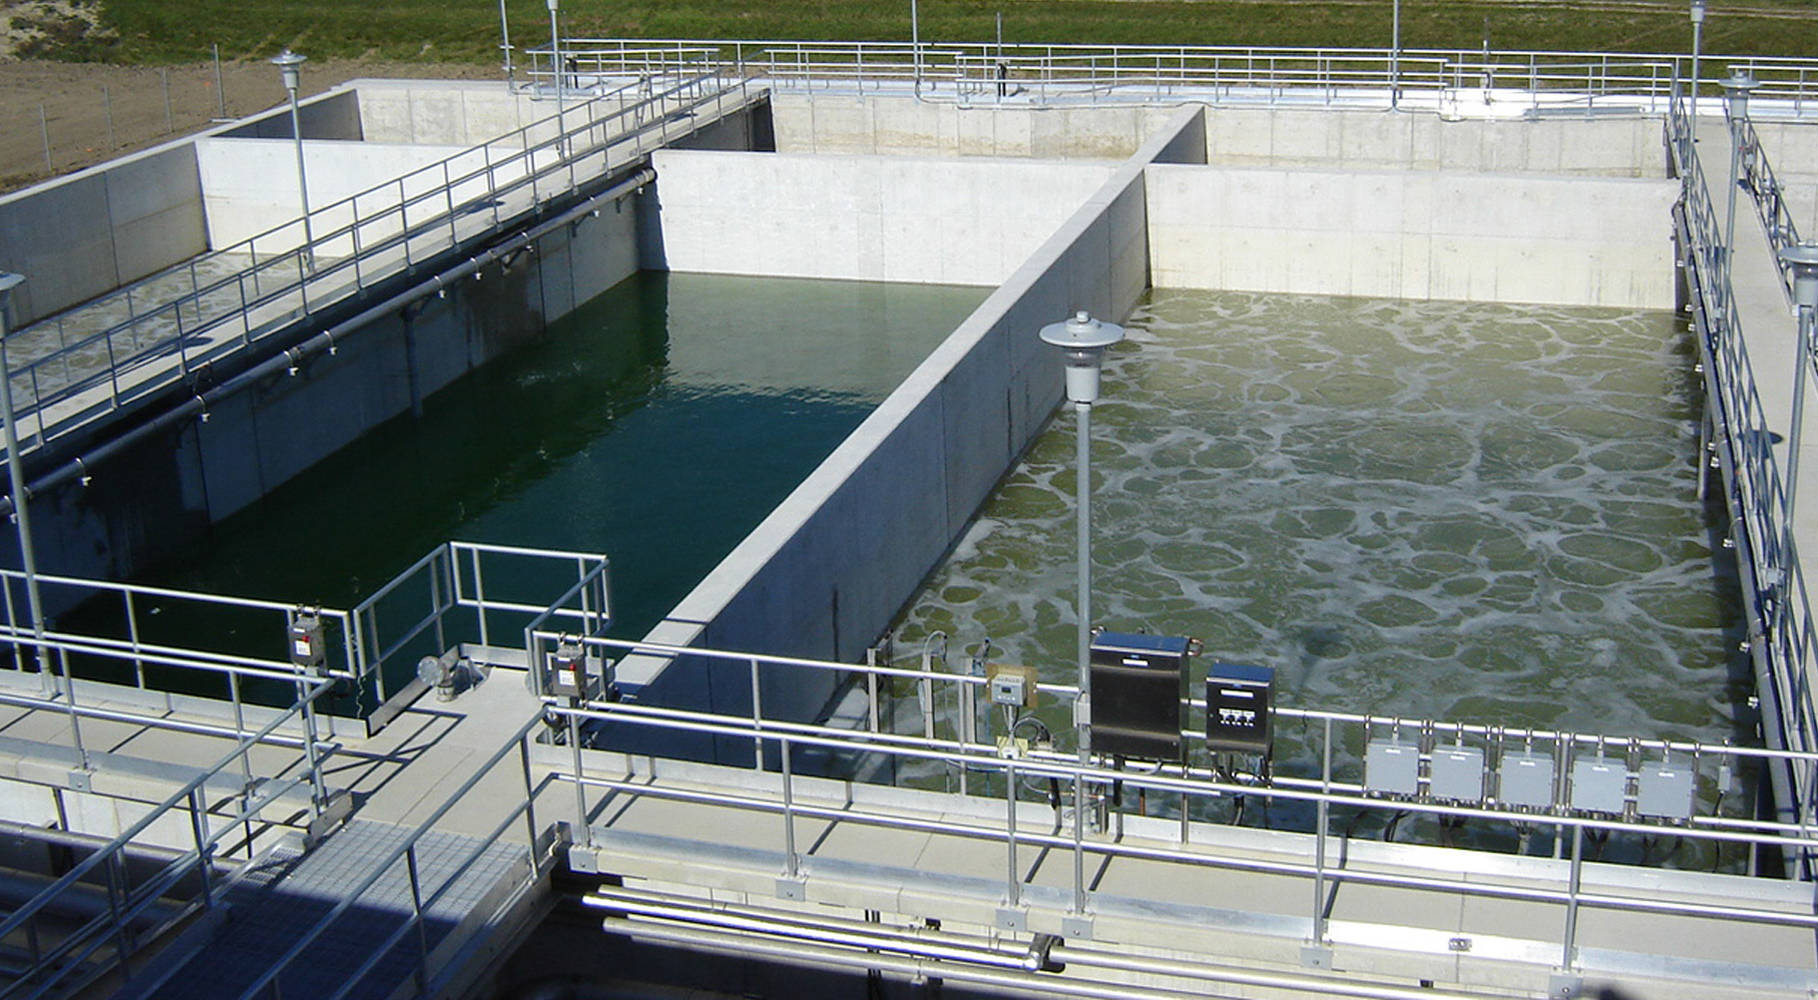 Rewatec SBR system for a large-scale municipal wastewater treatment project in Canada.